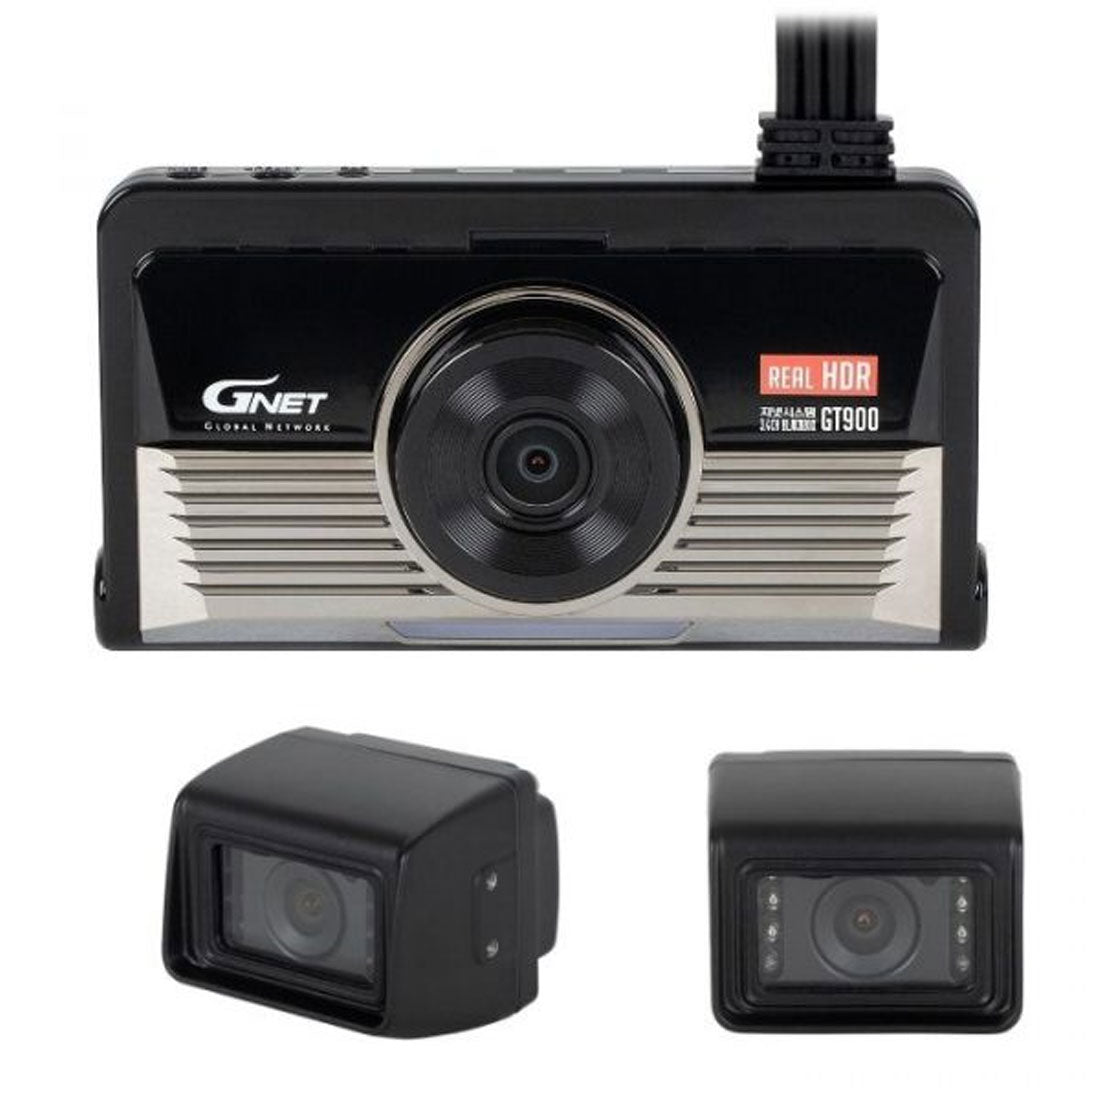 GNET GT900 3CH/4CH HDR Dash Cam: 1080p Front + 720p Right/Left IR Cameras